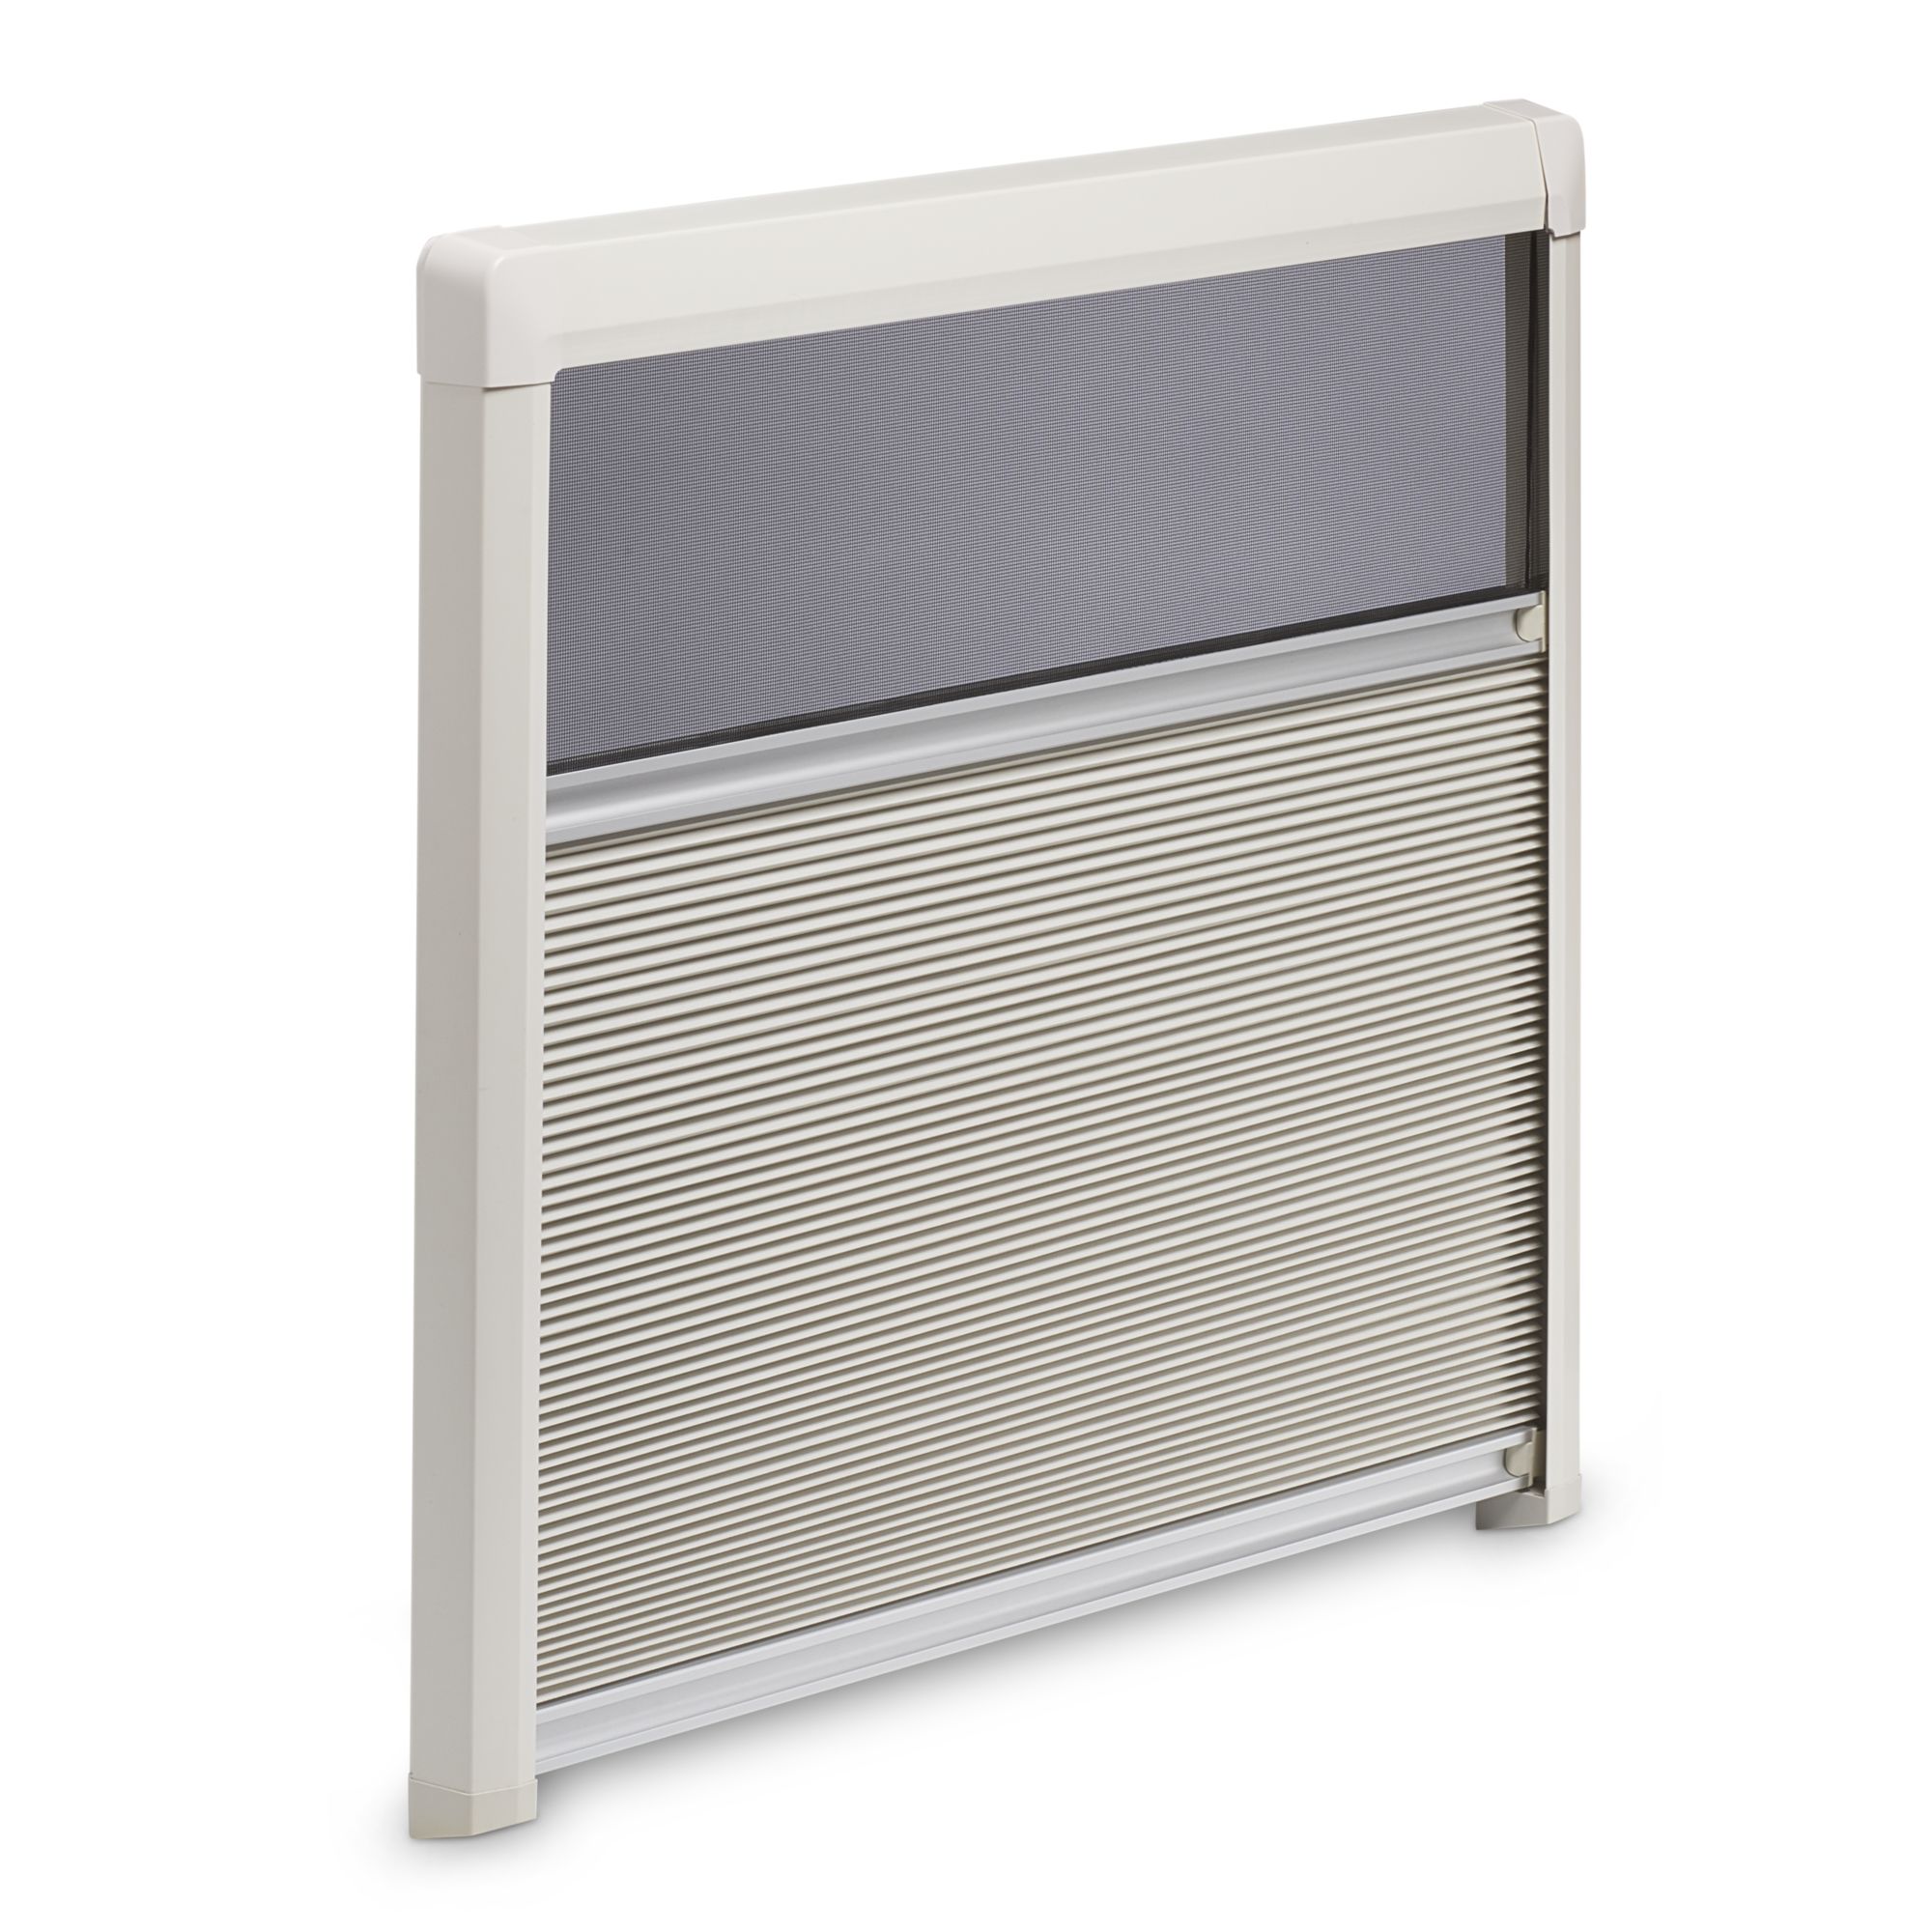 Dometic DB3H Roller Blind double-pleated, 535 x 700 mm, creme-white